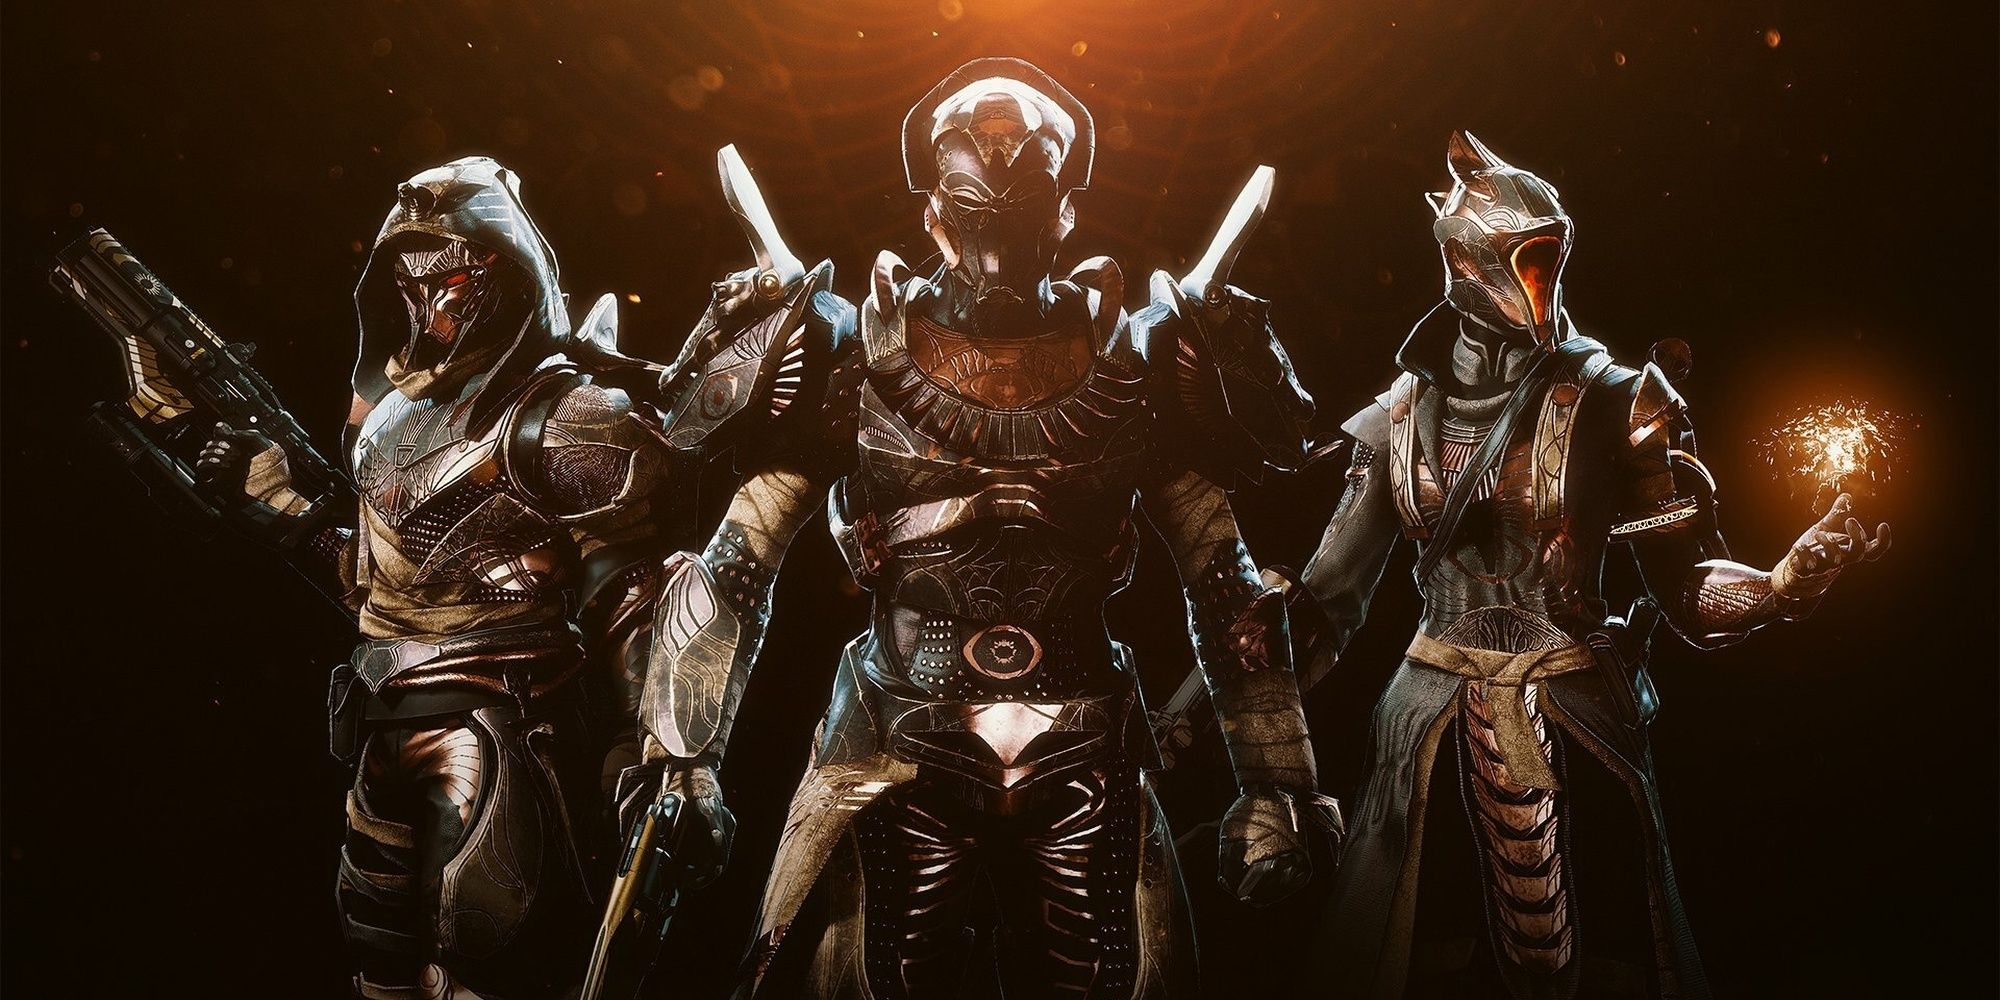 Destiny 2 Trials of Osiris A Hunter with a raised gun, Titan with a gun to their side and Warlock with a solar orb in their hand wearing Trials of Osiris armor against a dark background